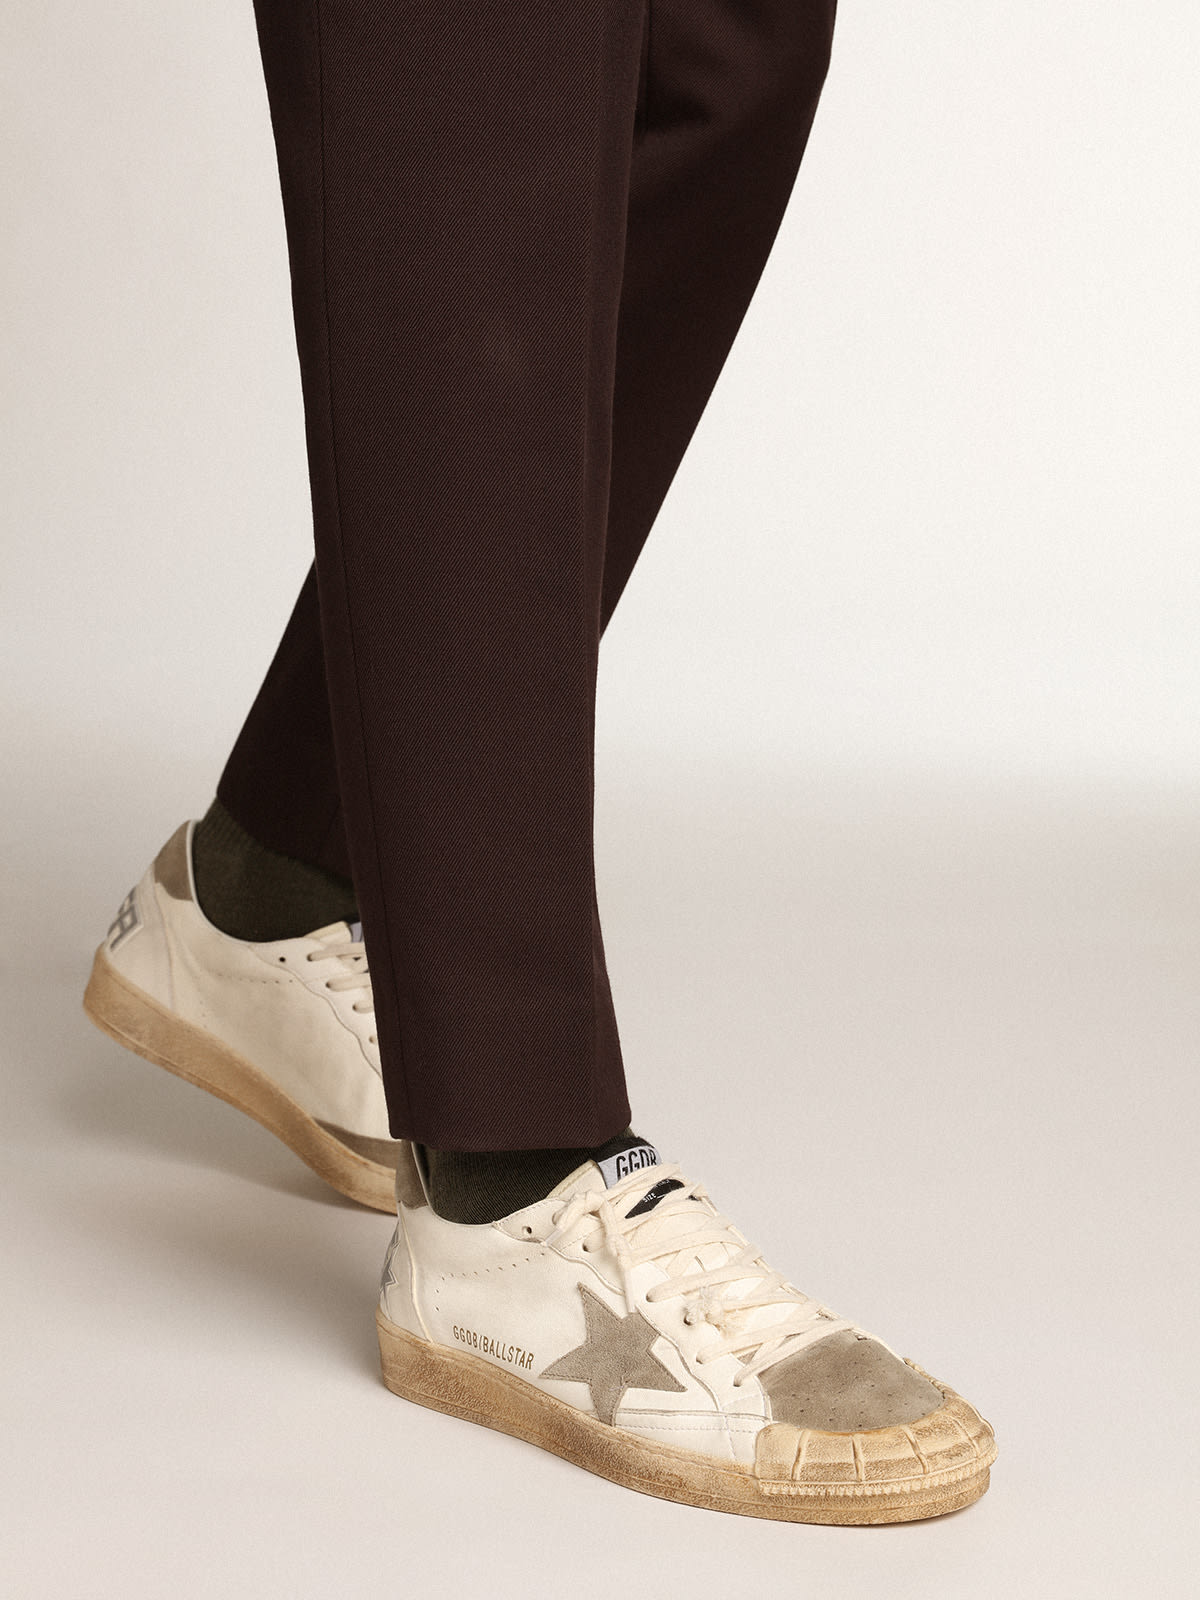 Golden Goose - Men's Ball Star LTD sneakers in white nappa leather with dove-gray suede star and heel tab in 